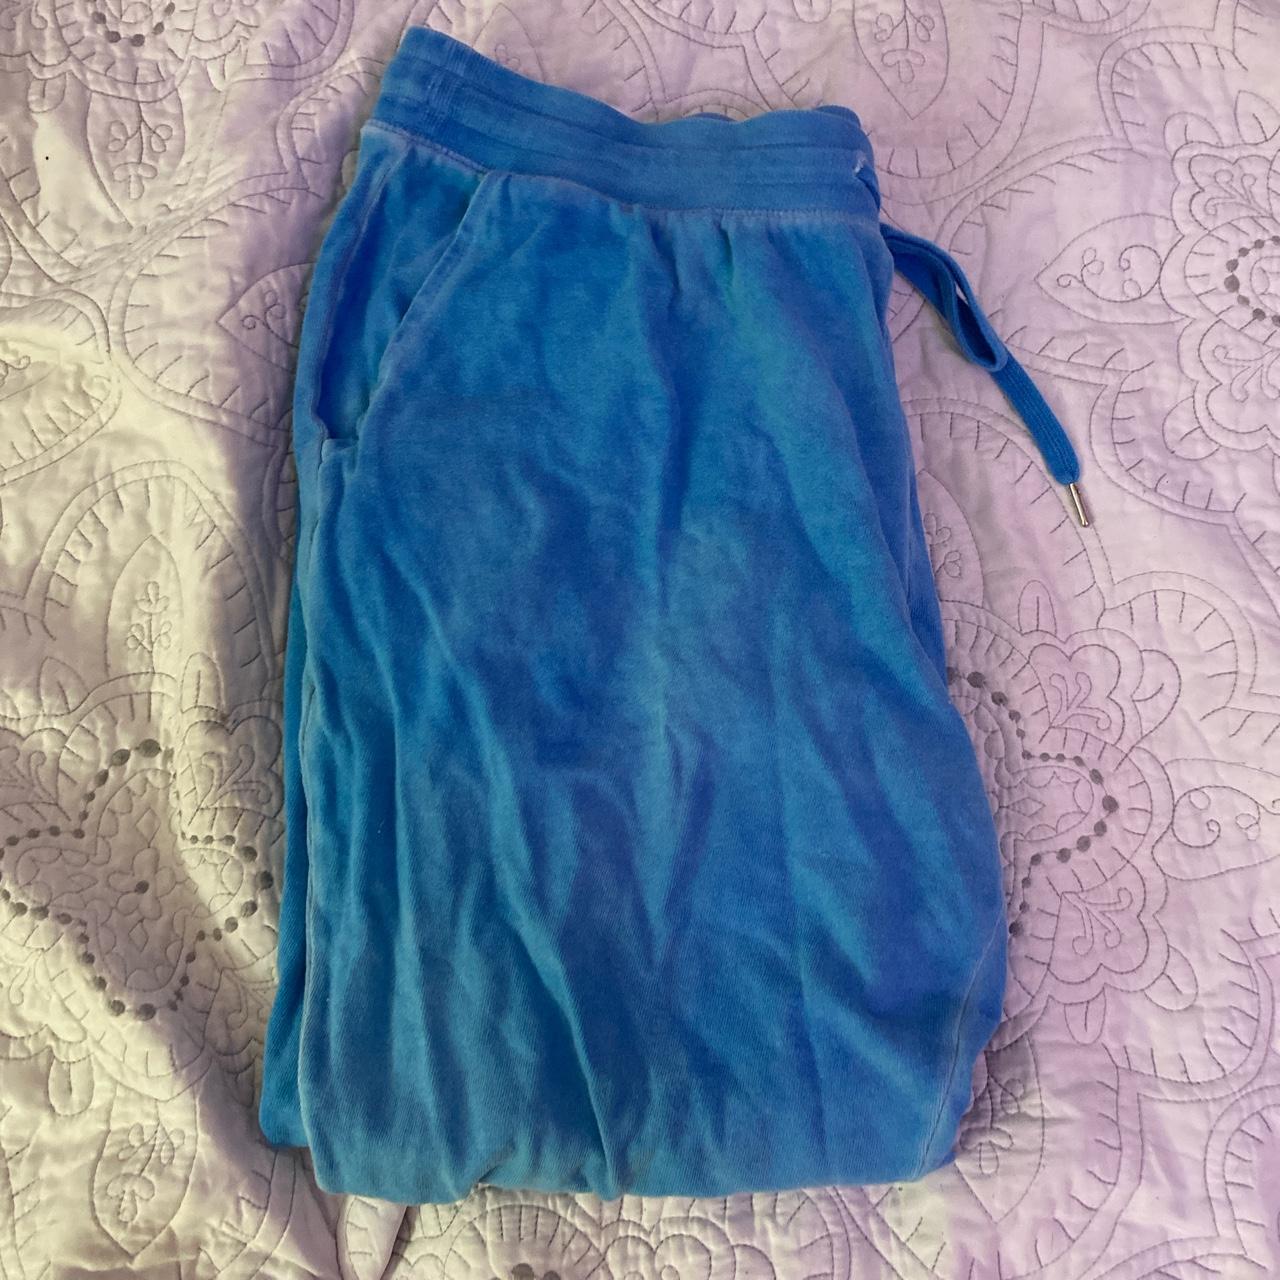 old navy blue sweatpants size LARGE small stain on - Depop